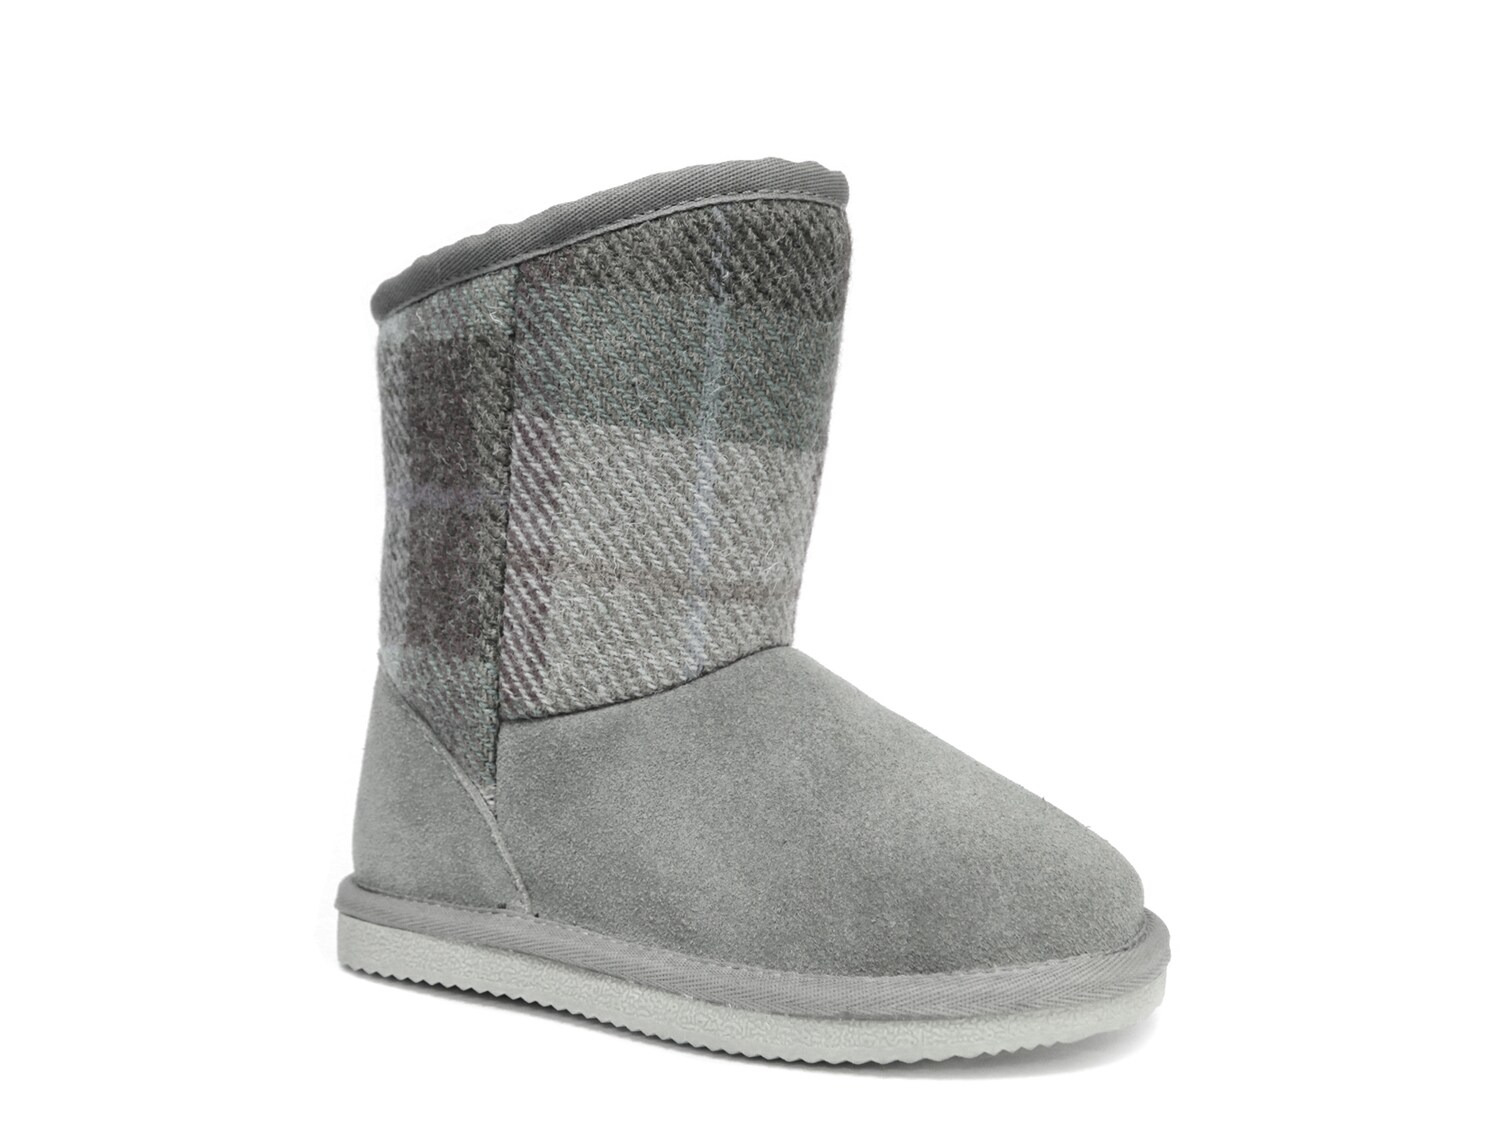 Lamo Wembley Toddler & Youth Boot - Free Shipping | DSW